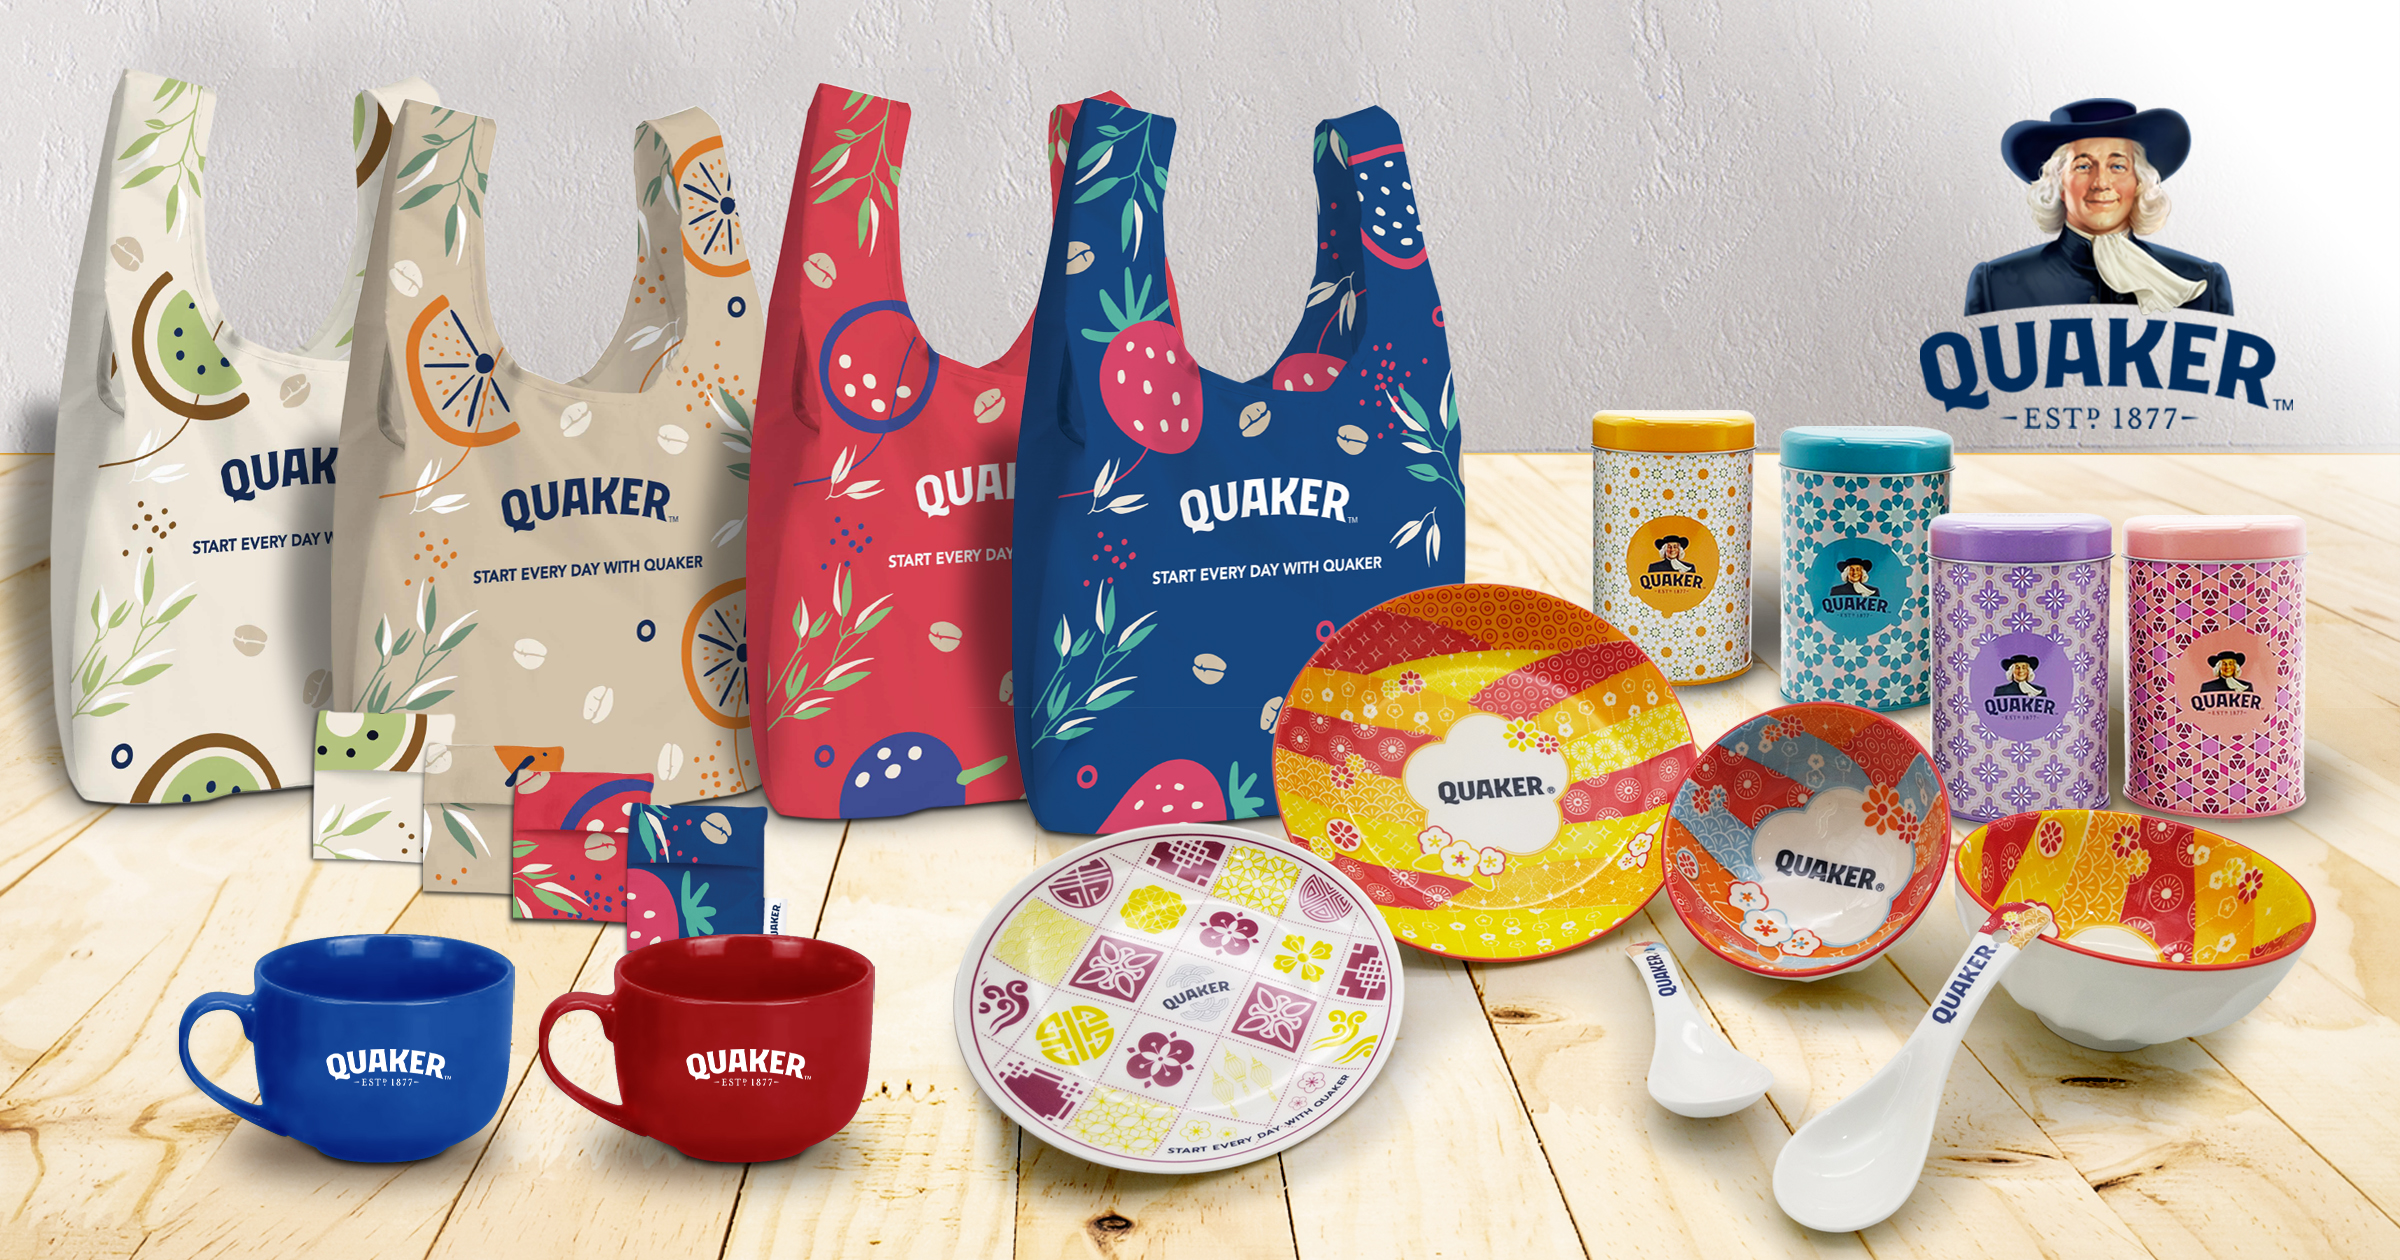 Quaker Oats Supercharges Its Campaigns with Exclusive Promotional GWP Merchandise